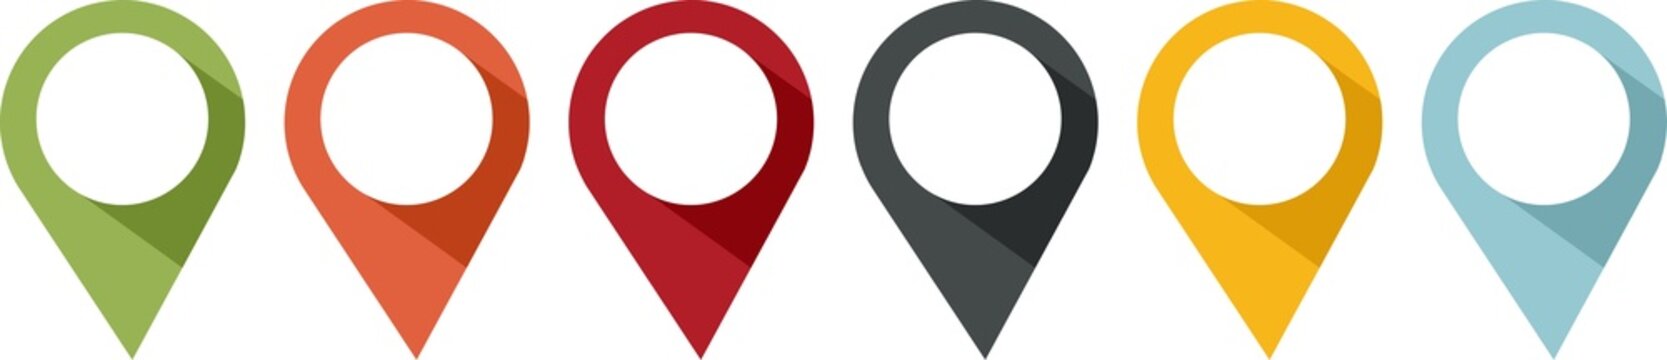 pin or tag to indicate a location in PNG format